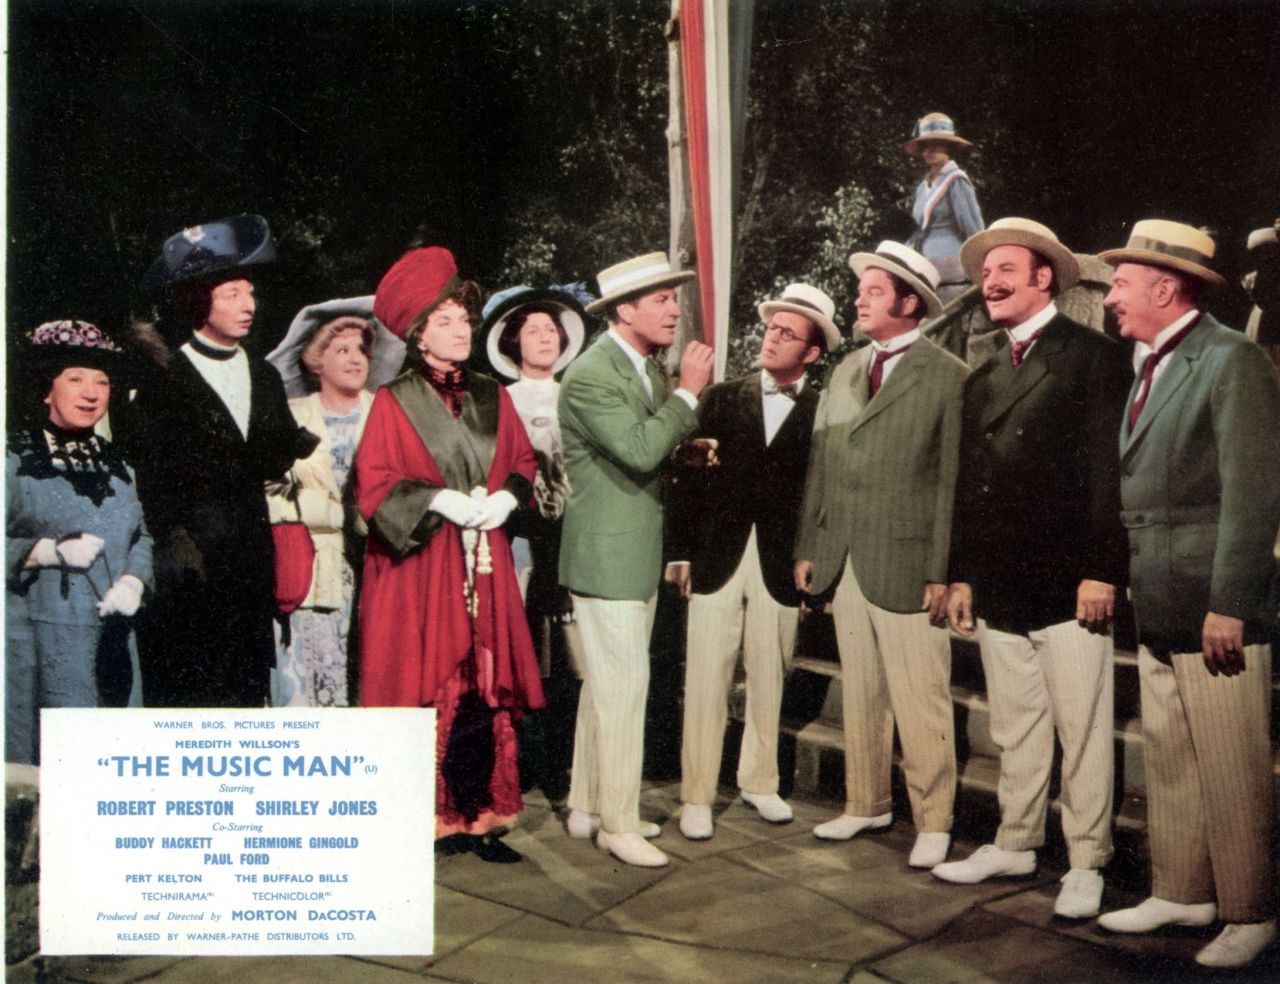 The Buffalo Bills, a quartet from Buffalo, New York, that won a gold medal at an international barbershop competition in 1950, was tapped to appear on Broadway in the original 1957 stage production of "The Music Man." They reprised their role in the 1962 movie version of the musical.       